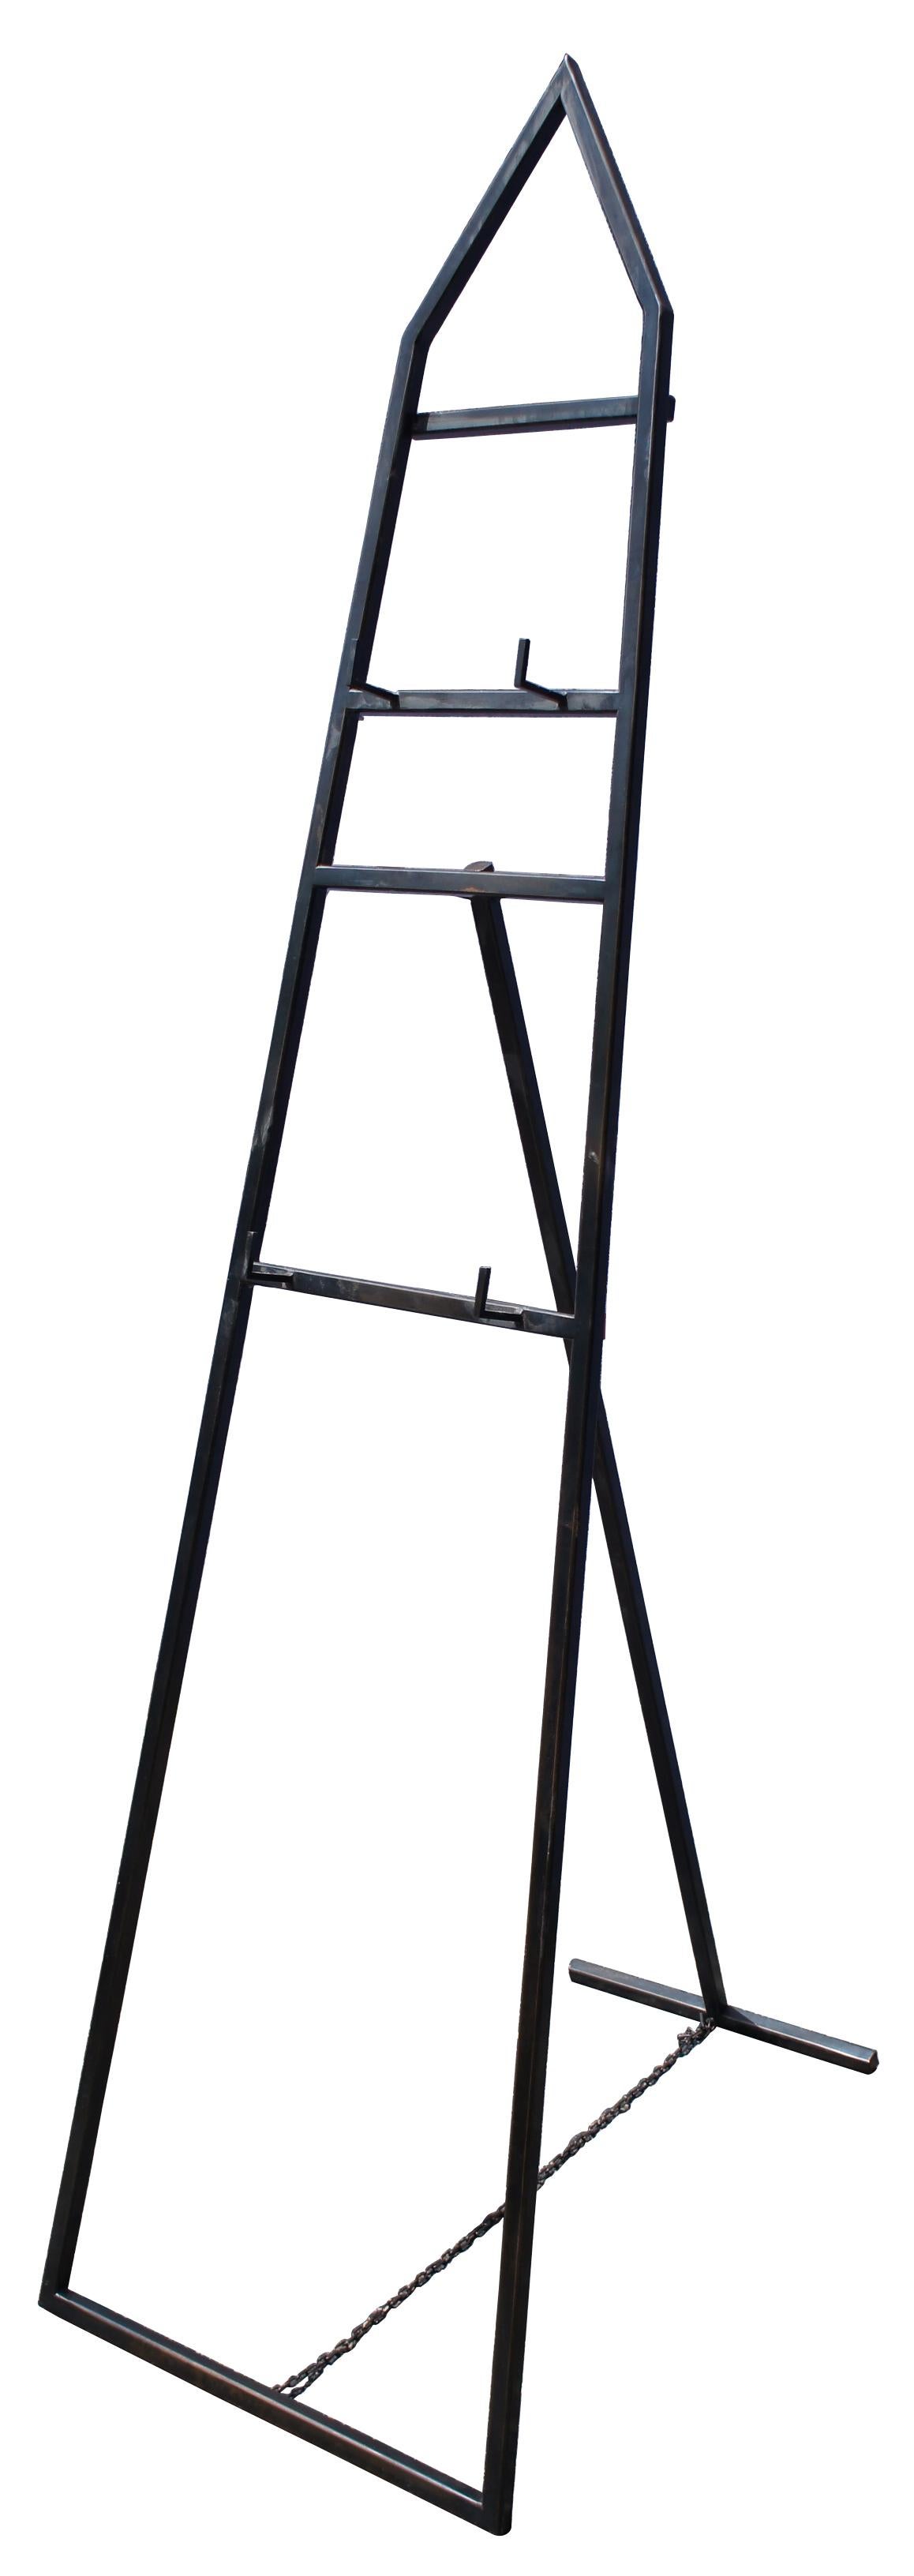 Black metal obelisk shaped display stand with two easel shelves for displaying multiple pieces of art.

Measures: Width of Supports - 9.25” and 6.75”.
 